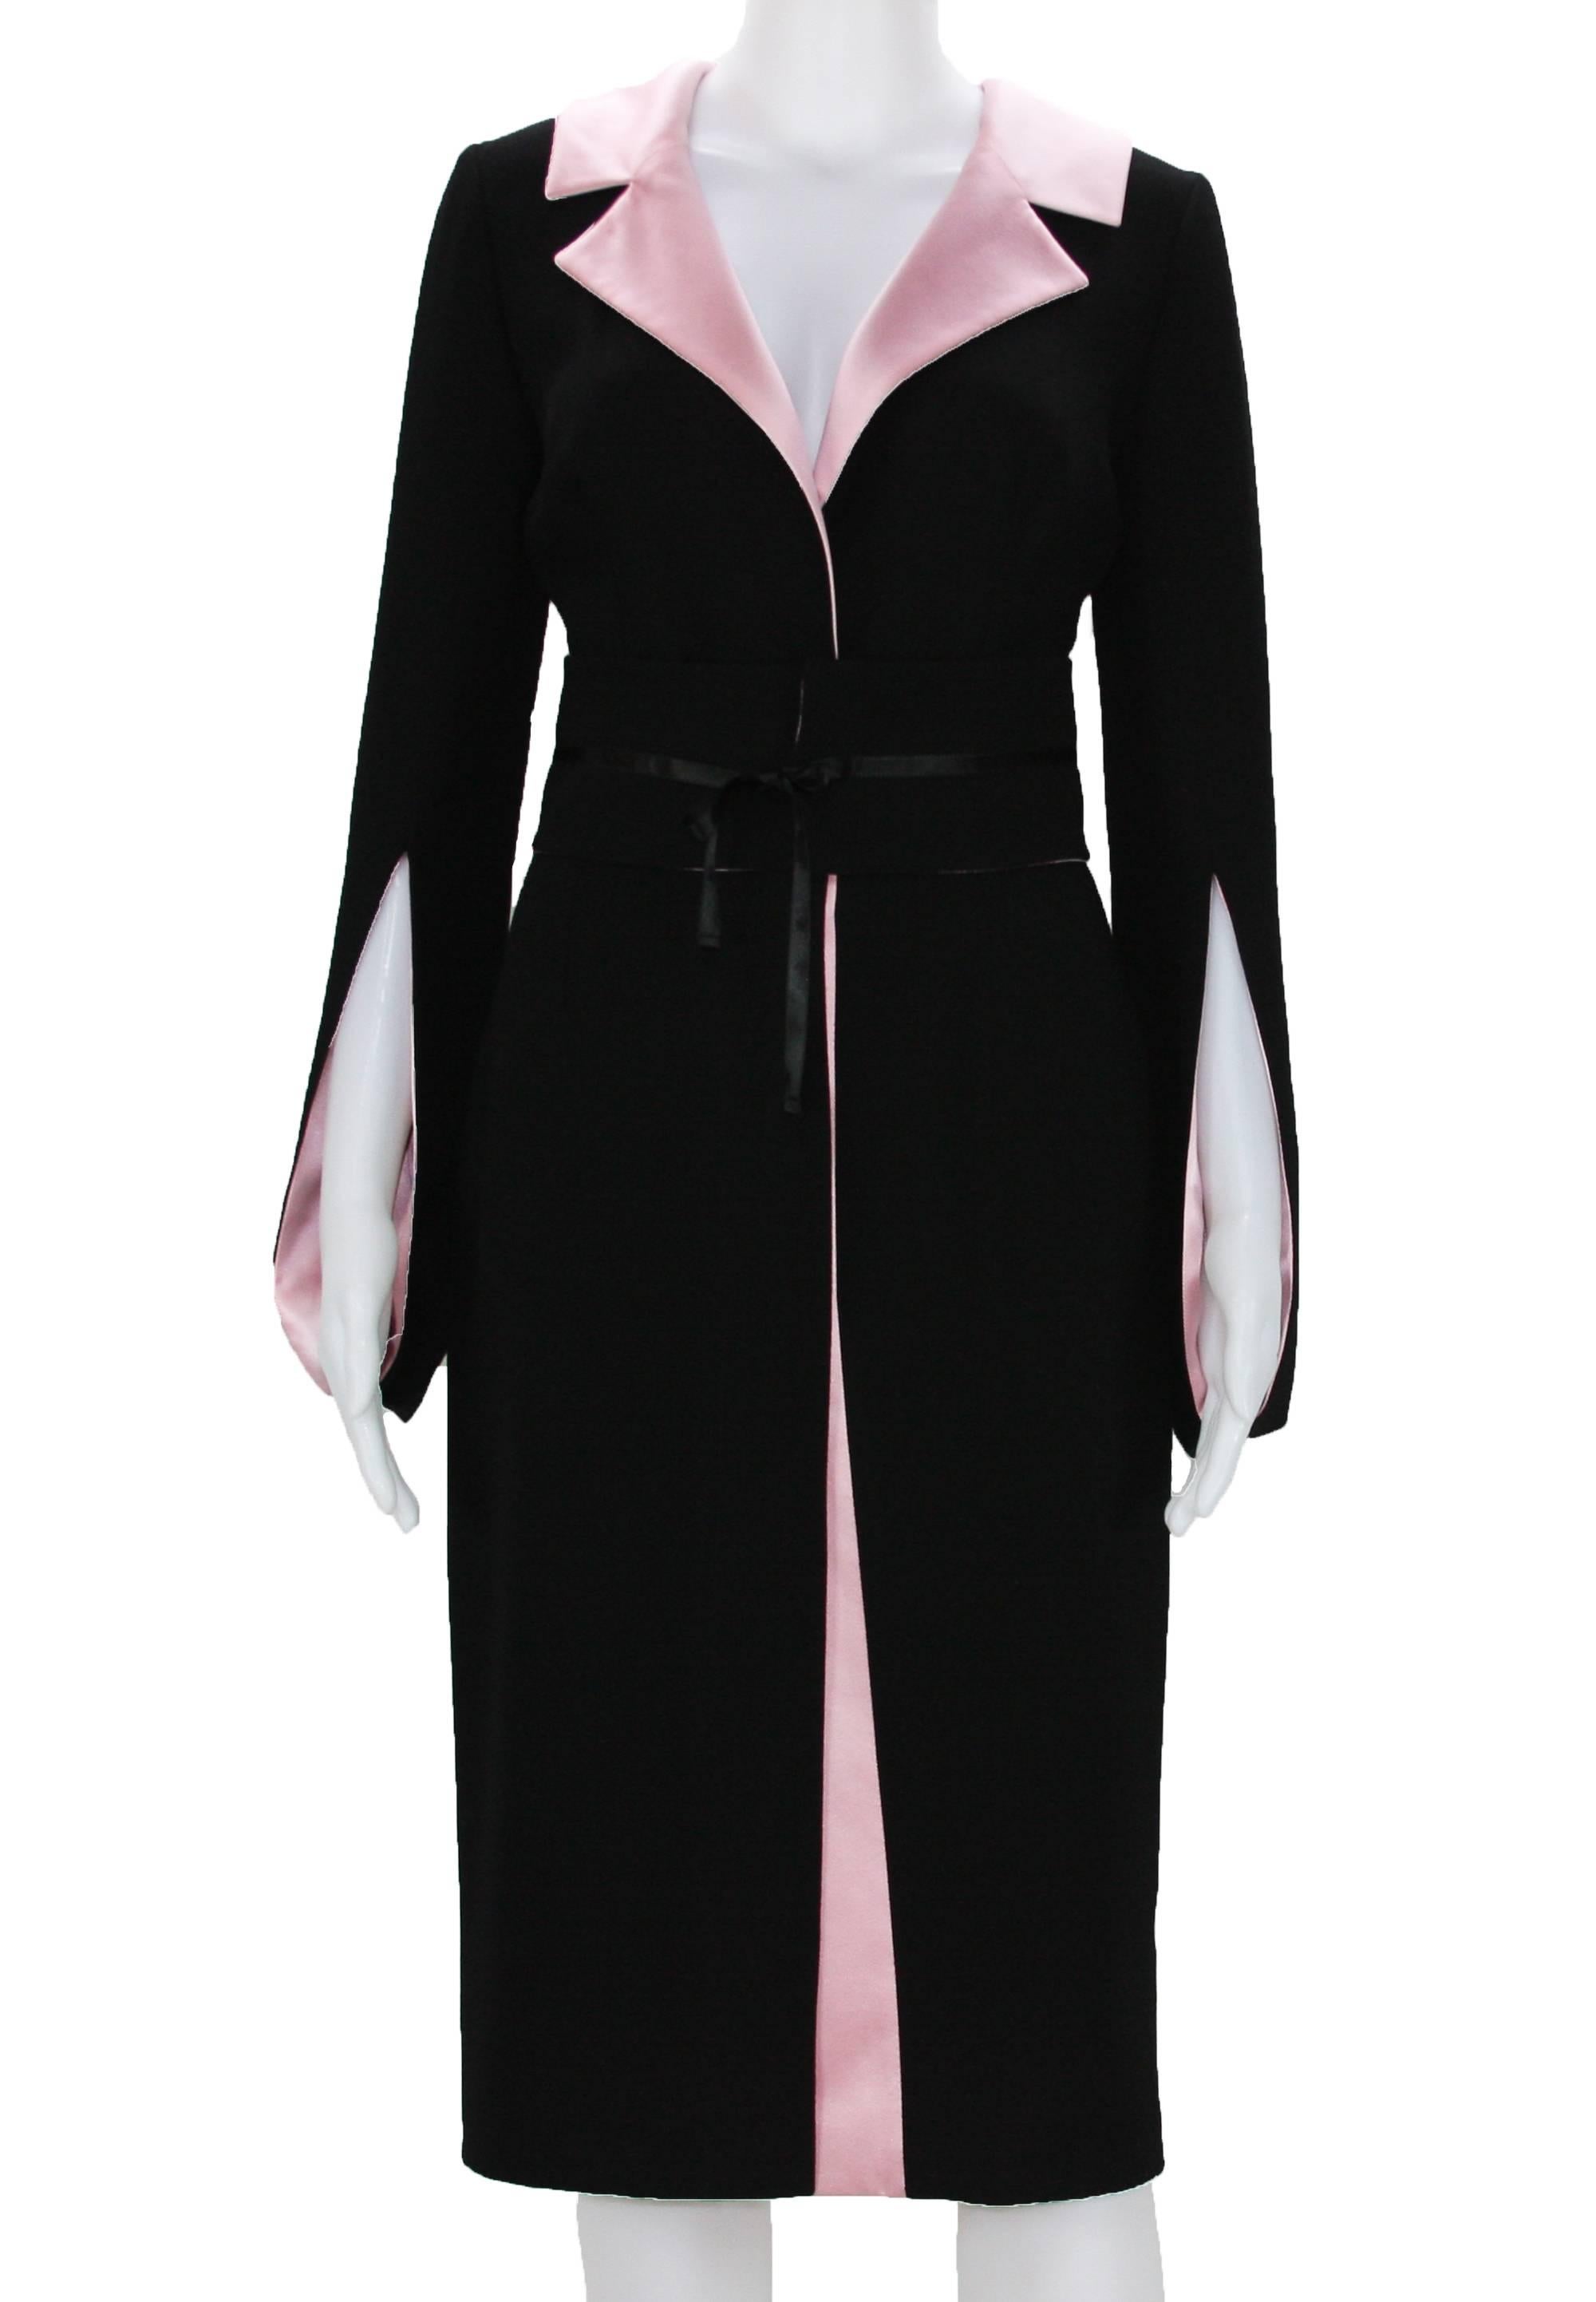 The 80's Will Never Fade Uut of Style!!!
Balmain 80's Classic Black & Pink Wool Dress with Belt
Fr. size 36 - US 4
100% Wool
Lining - 70% Acetate, 30% Silk.
Detachable Belt (reversible side - pink).
Unique Kimono Style Sleeve - fully lined in pink